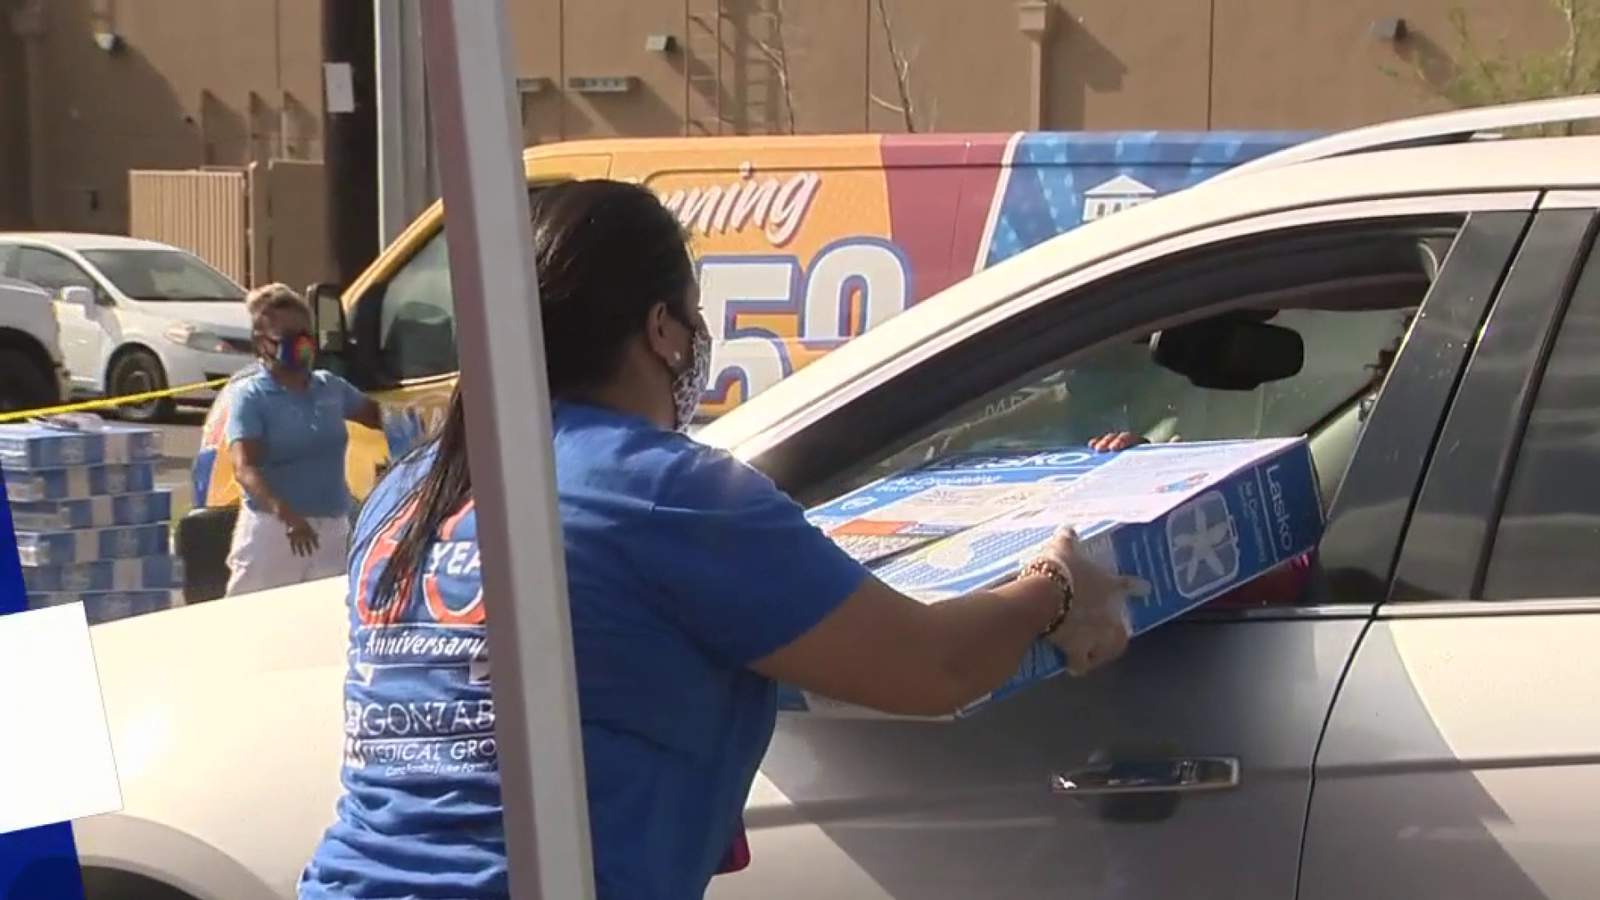 Senior citizens receive free fans at drive-thru giveaway